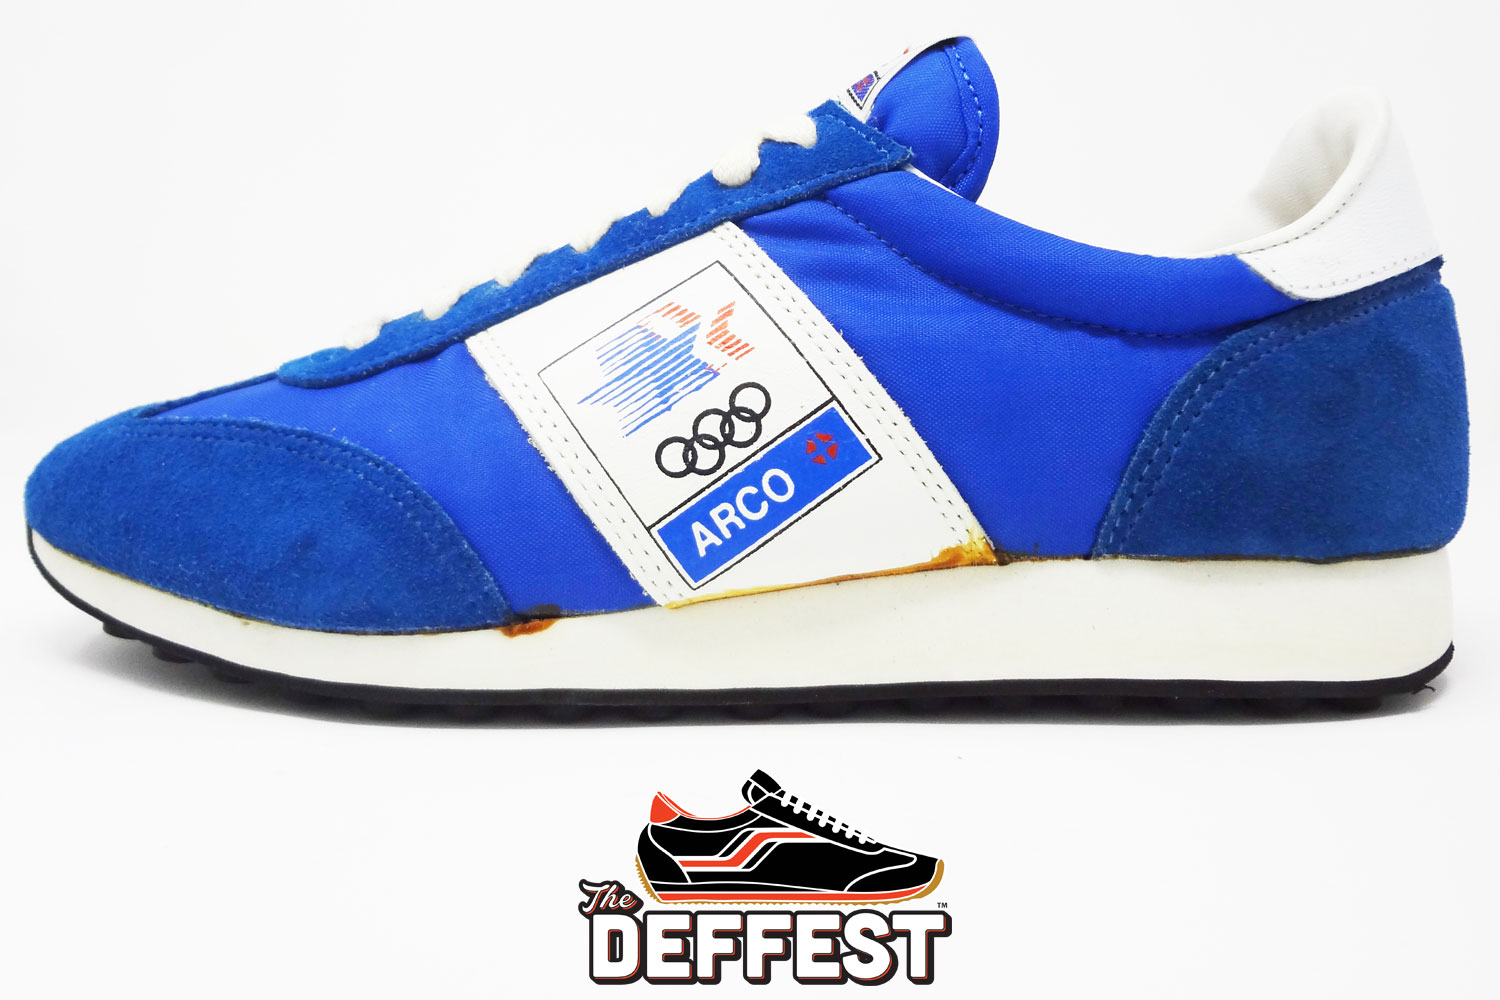 1984 Olympics ARCO vintage sneakers @ The Deffest